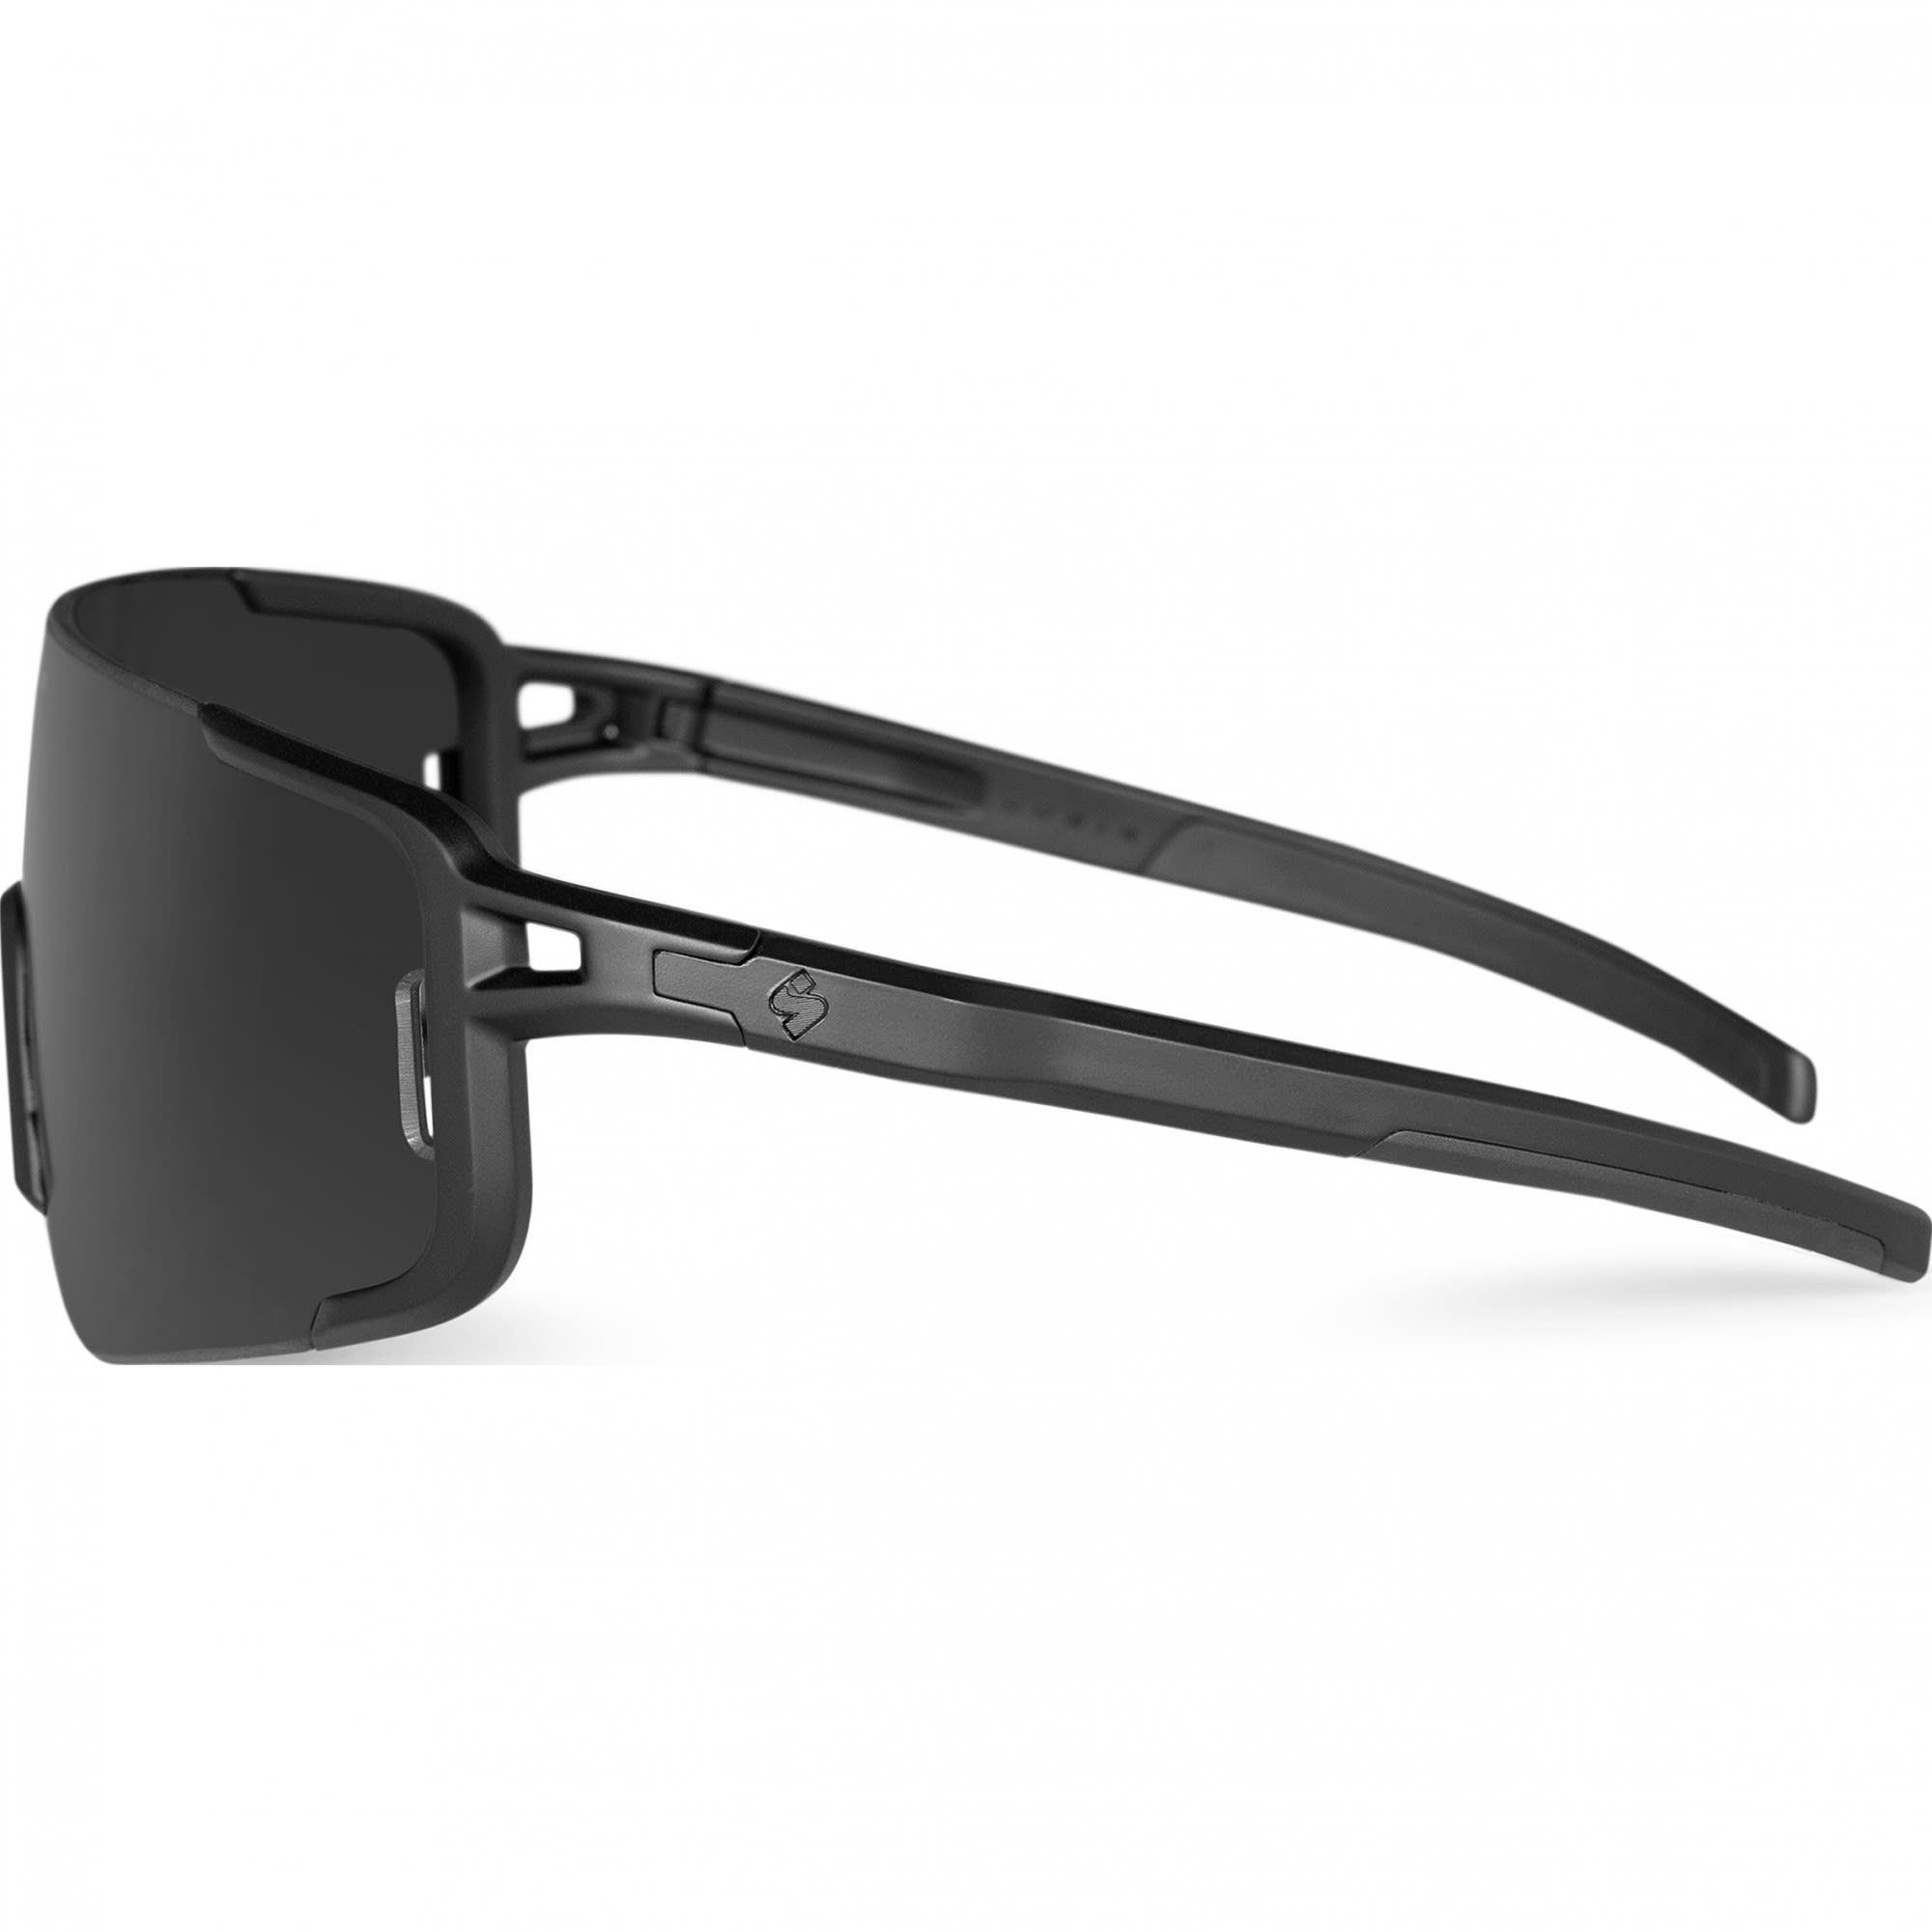 Sweet Protection Fahrradbrille Sweet Polarized Accessoires Protection Ronin